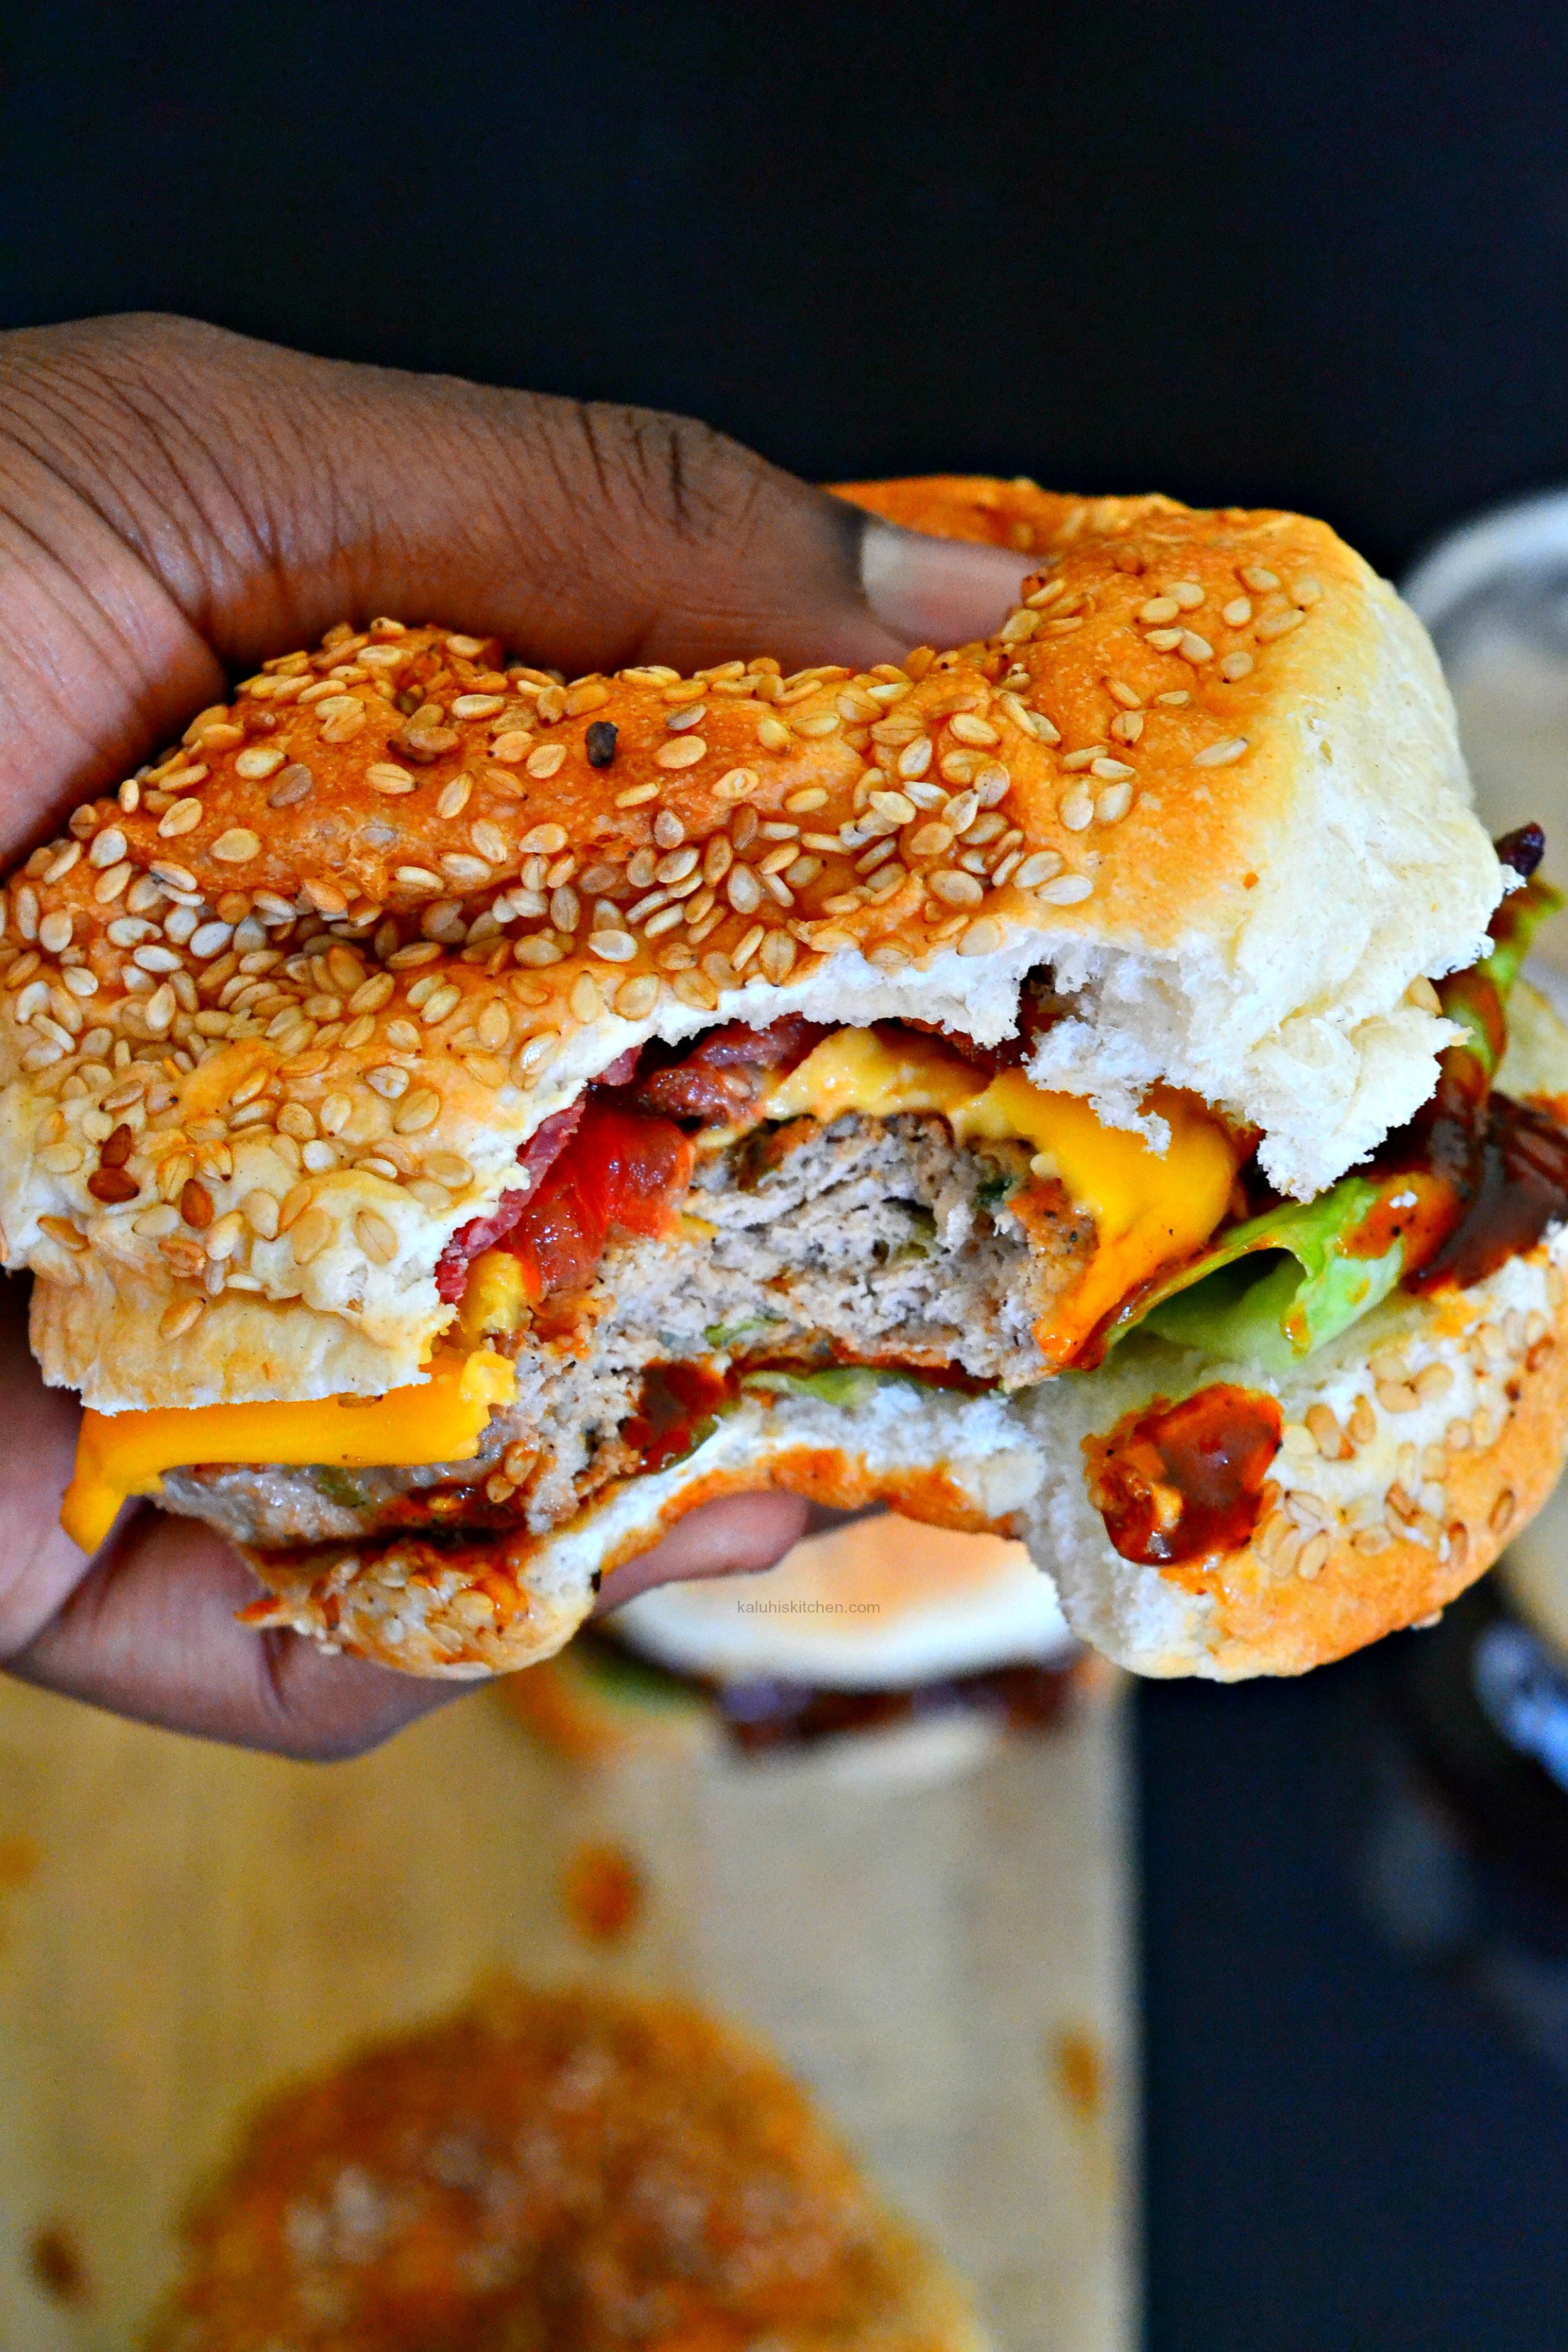 chicken-bacon-knockout-burger_how-to-make-the-best-bacon-burger_guinness-recipes_best-african-food-blogs_kaluhiskitchen-com